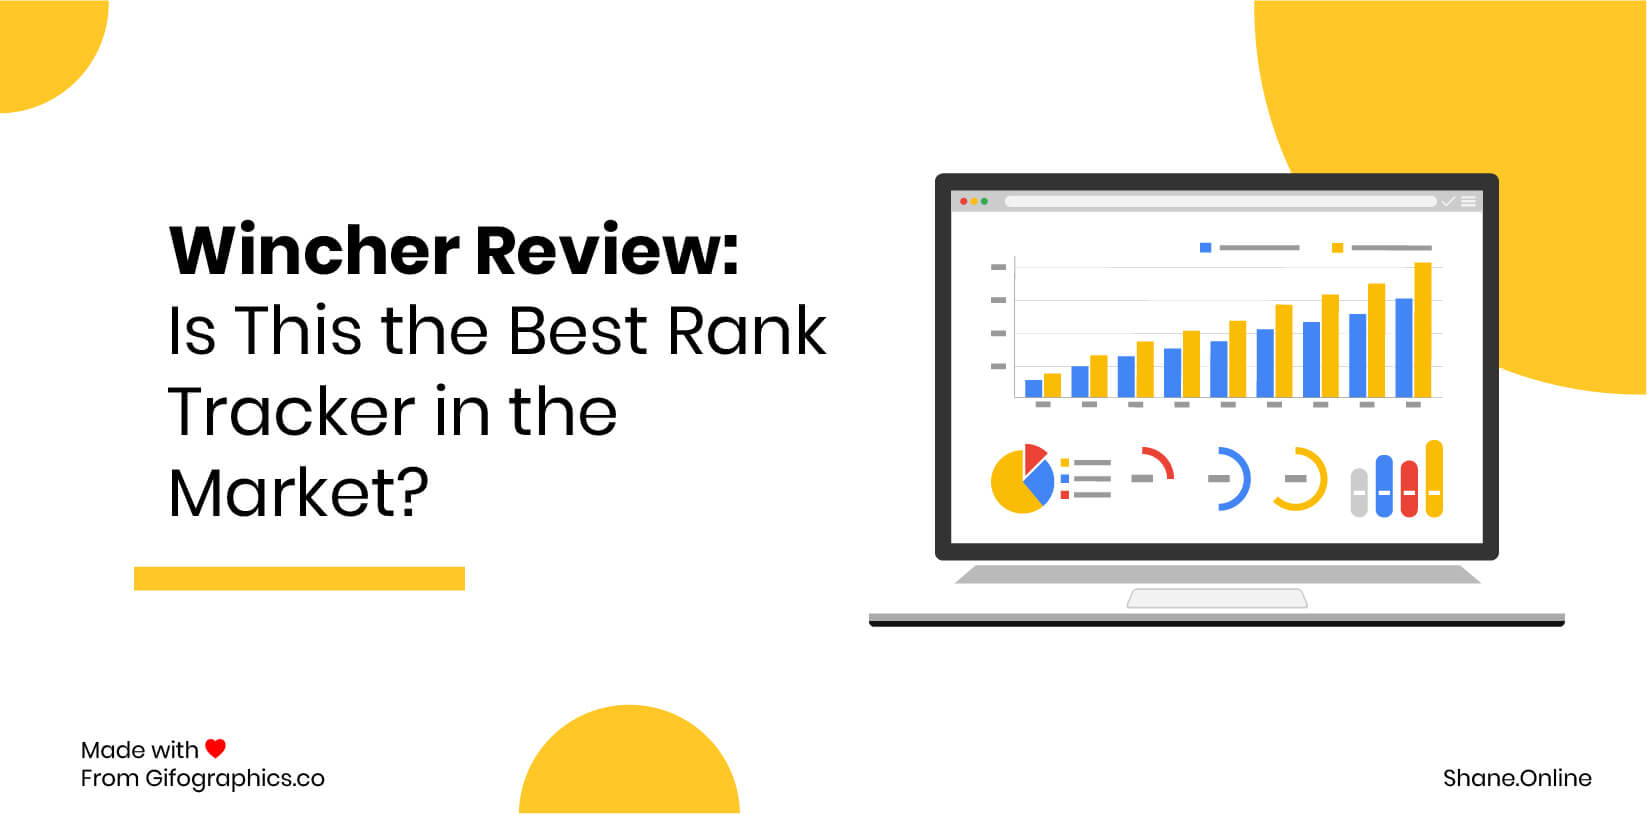 Wincher Review 2021 Is This the Best Rank Tracker in the Market